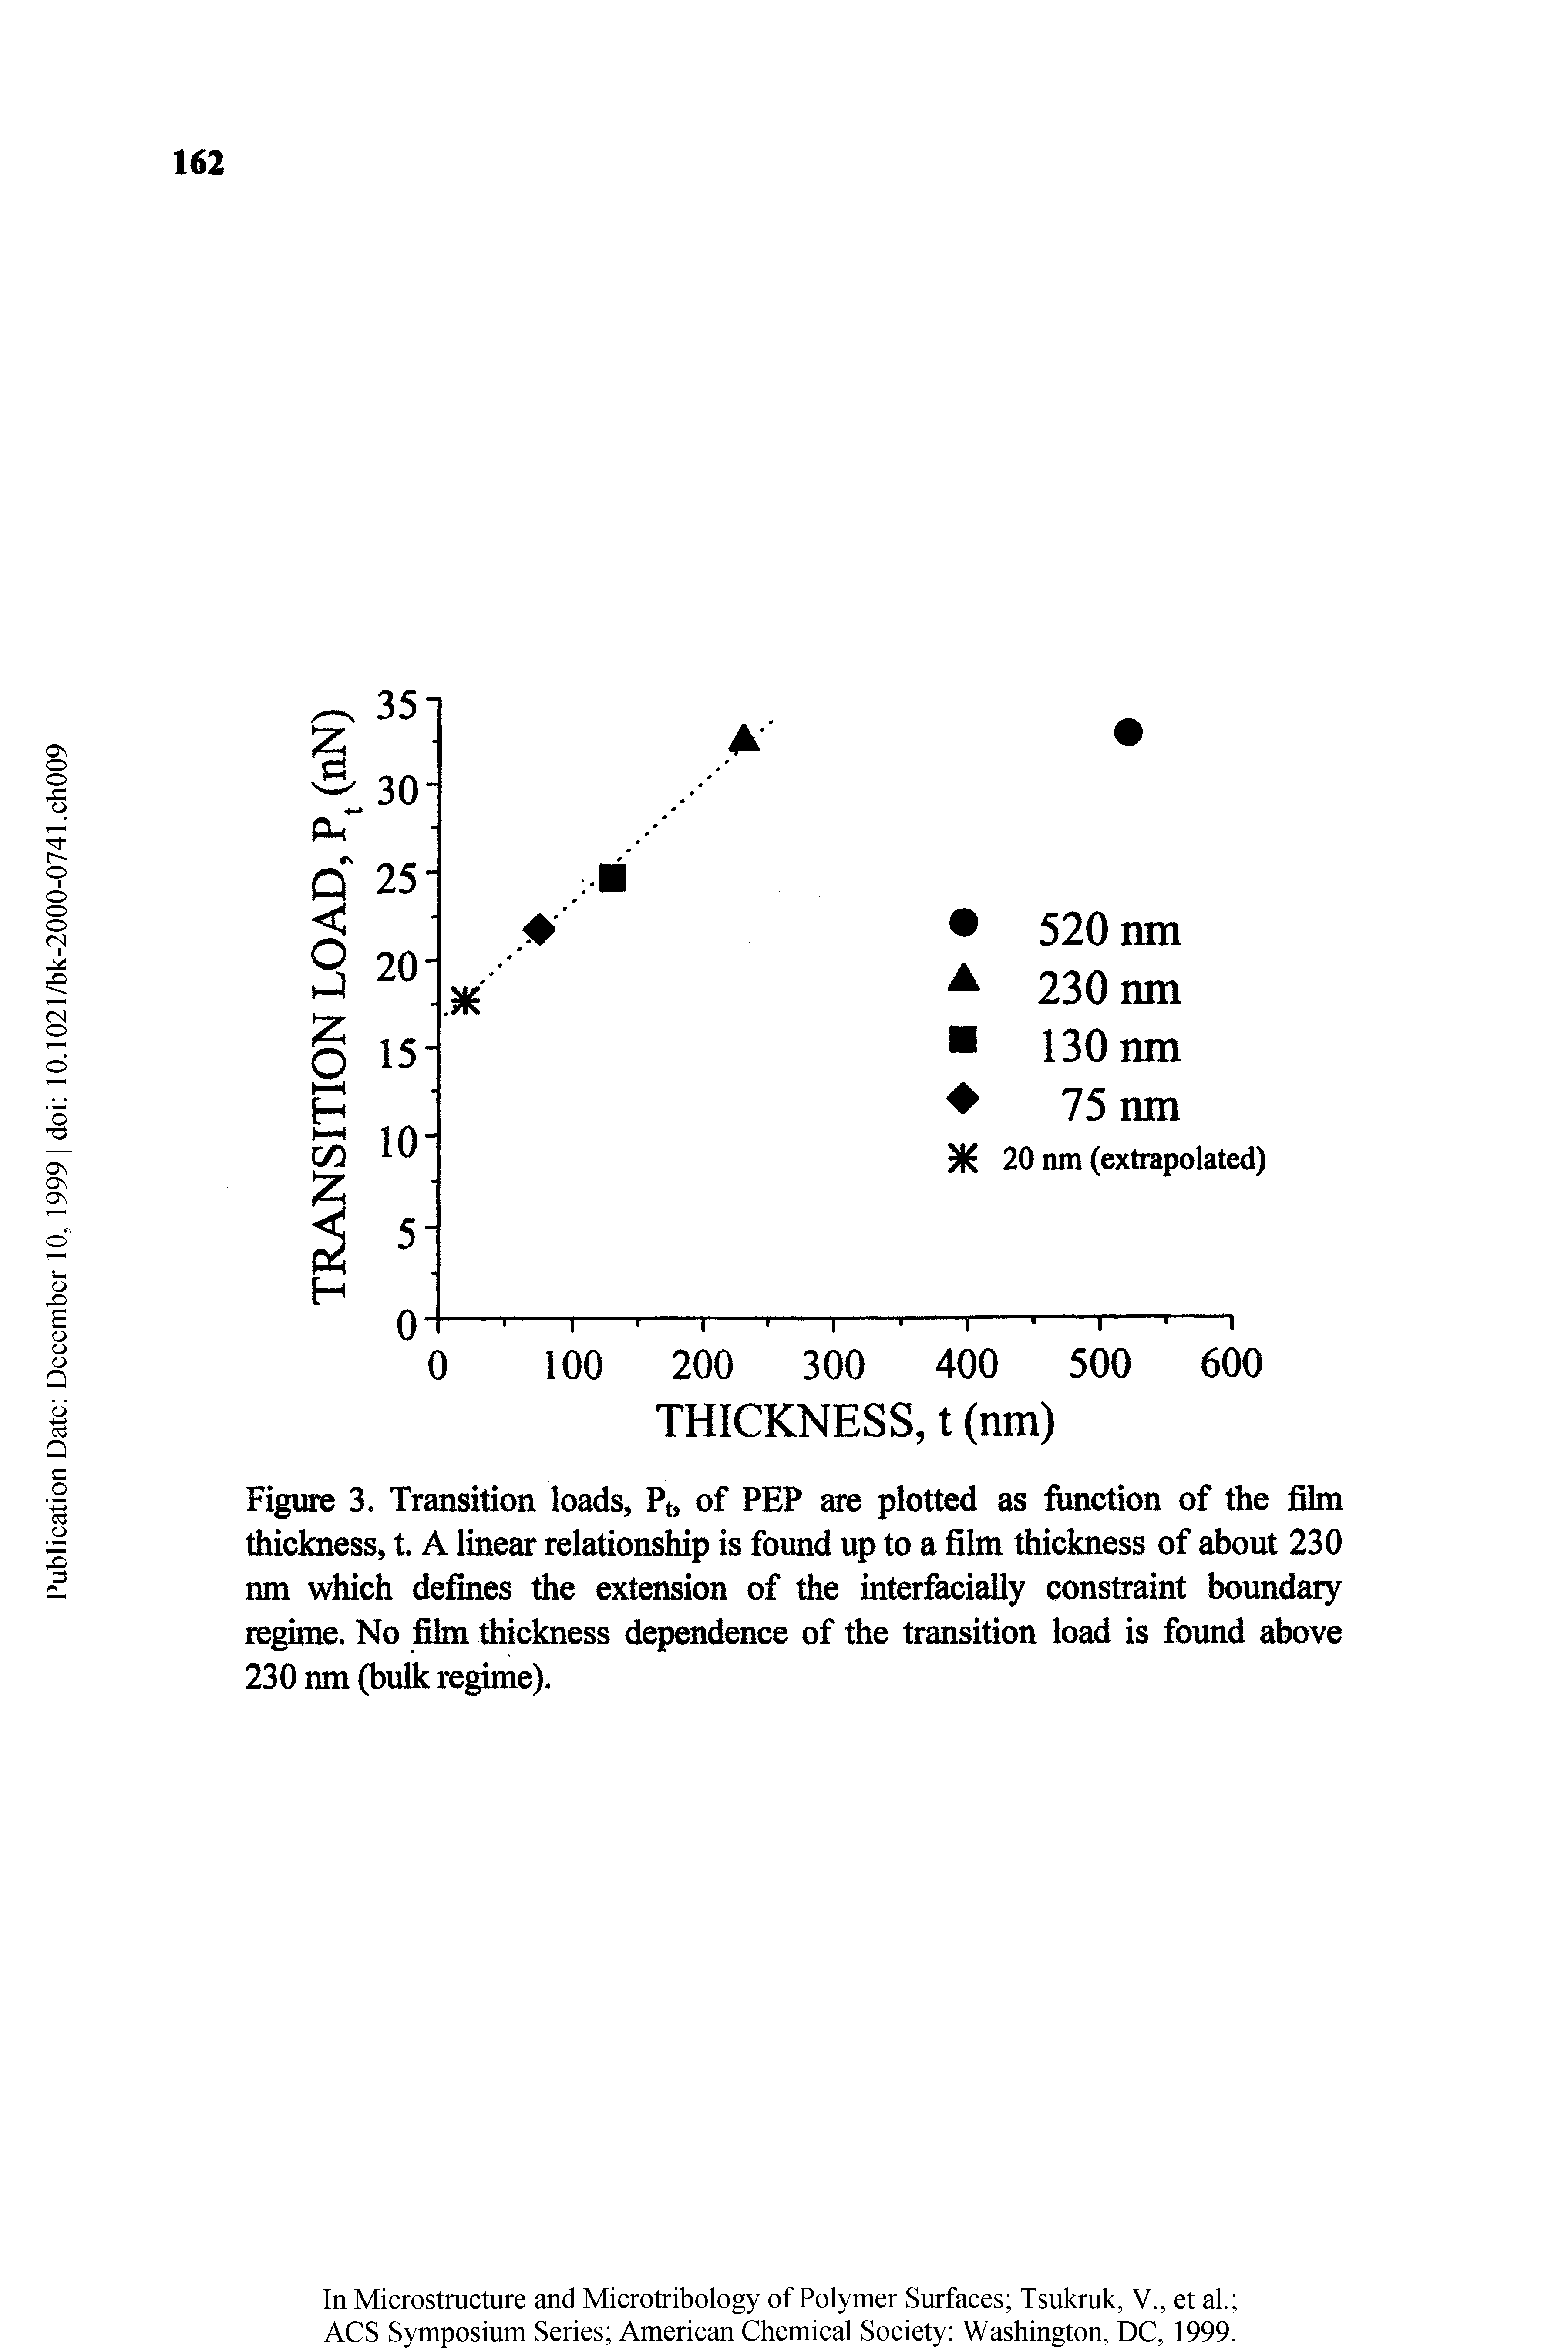 Figure 3. Transition loads, Pt, of PEP are plotted as function of the film thickness, t. A linear relationship is found up to a film thickness of about 230 nm which defines the extension of the interfacially constraint boundary regime. No film thickness dependence of the transition load is found above 230 nm (bulk regime).